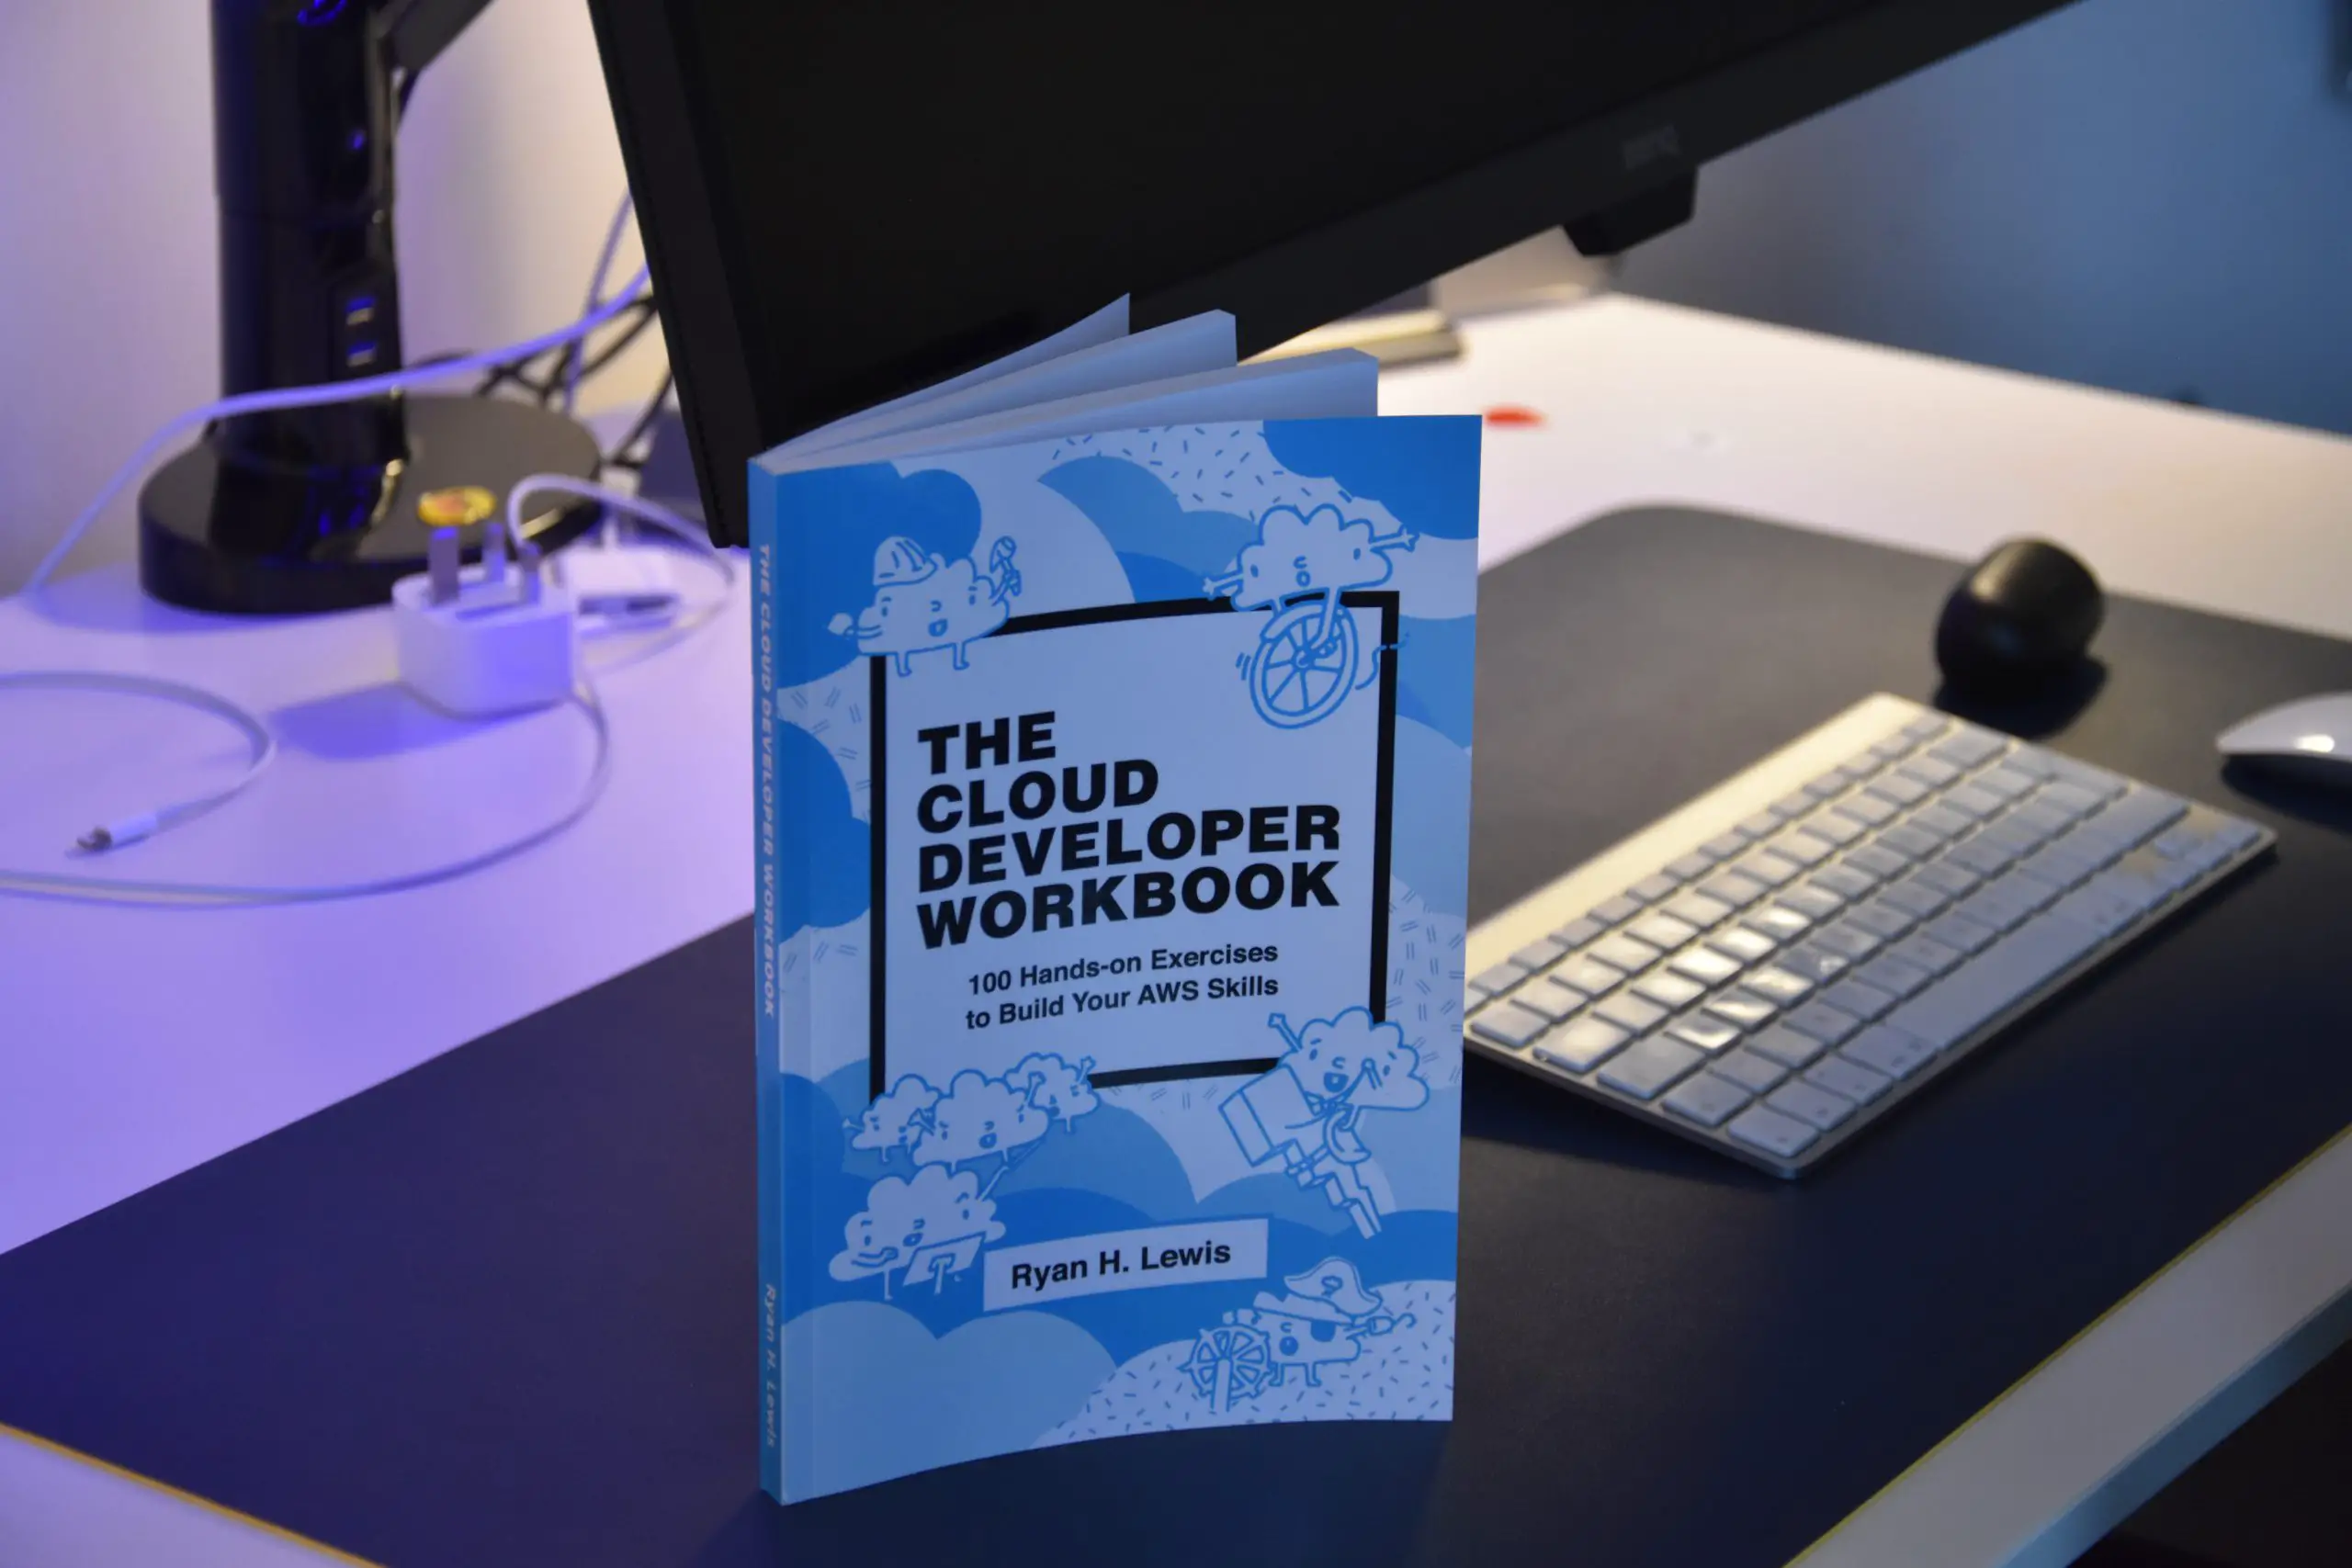 A picture of the cloud developer workbook